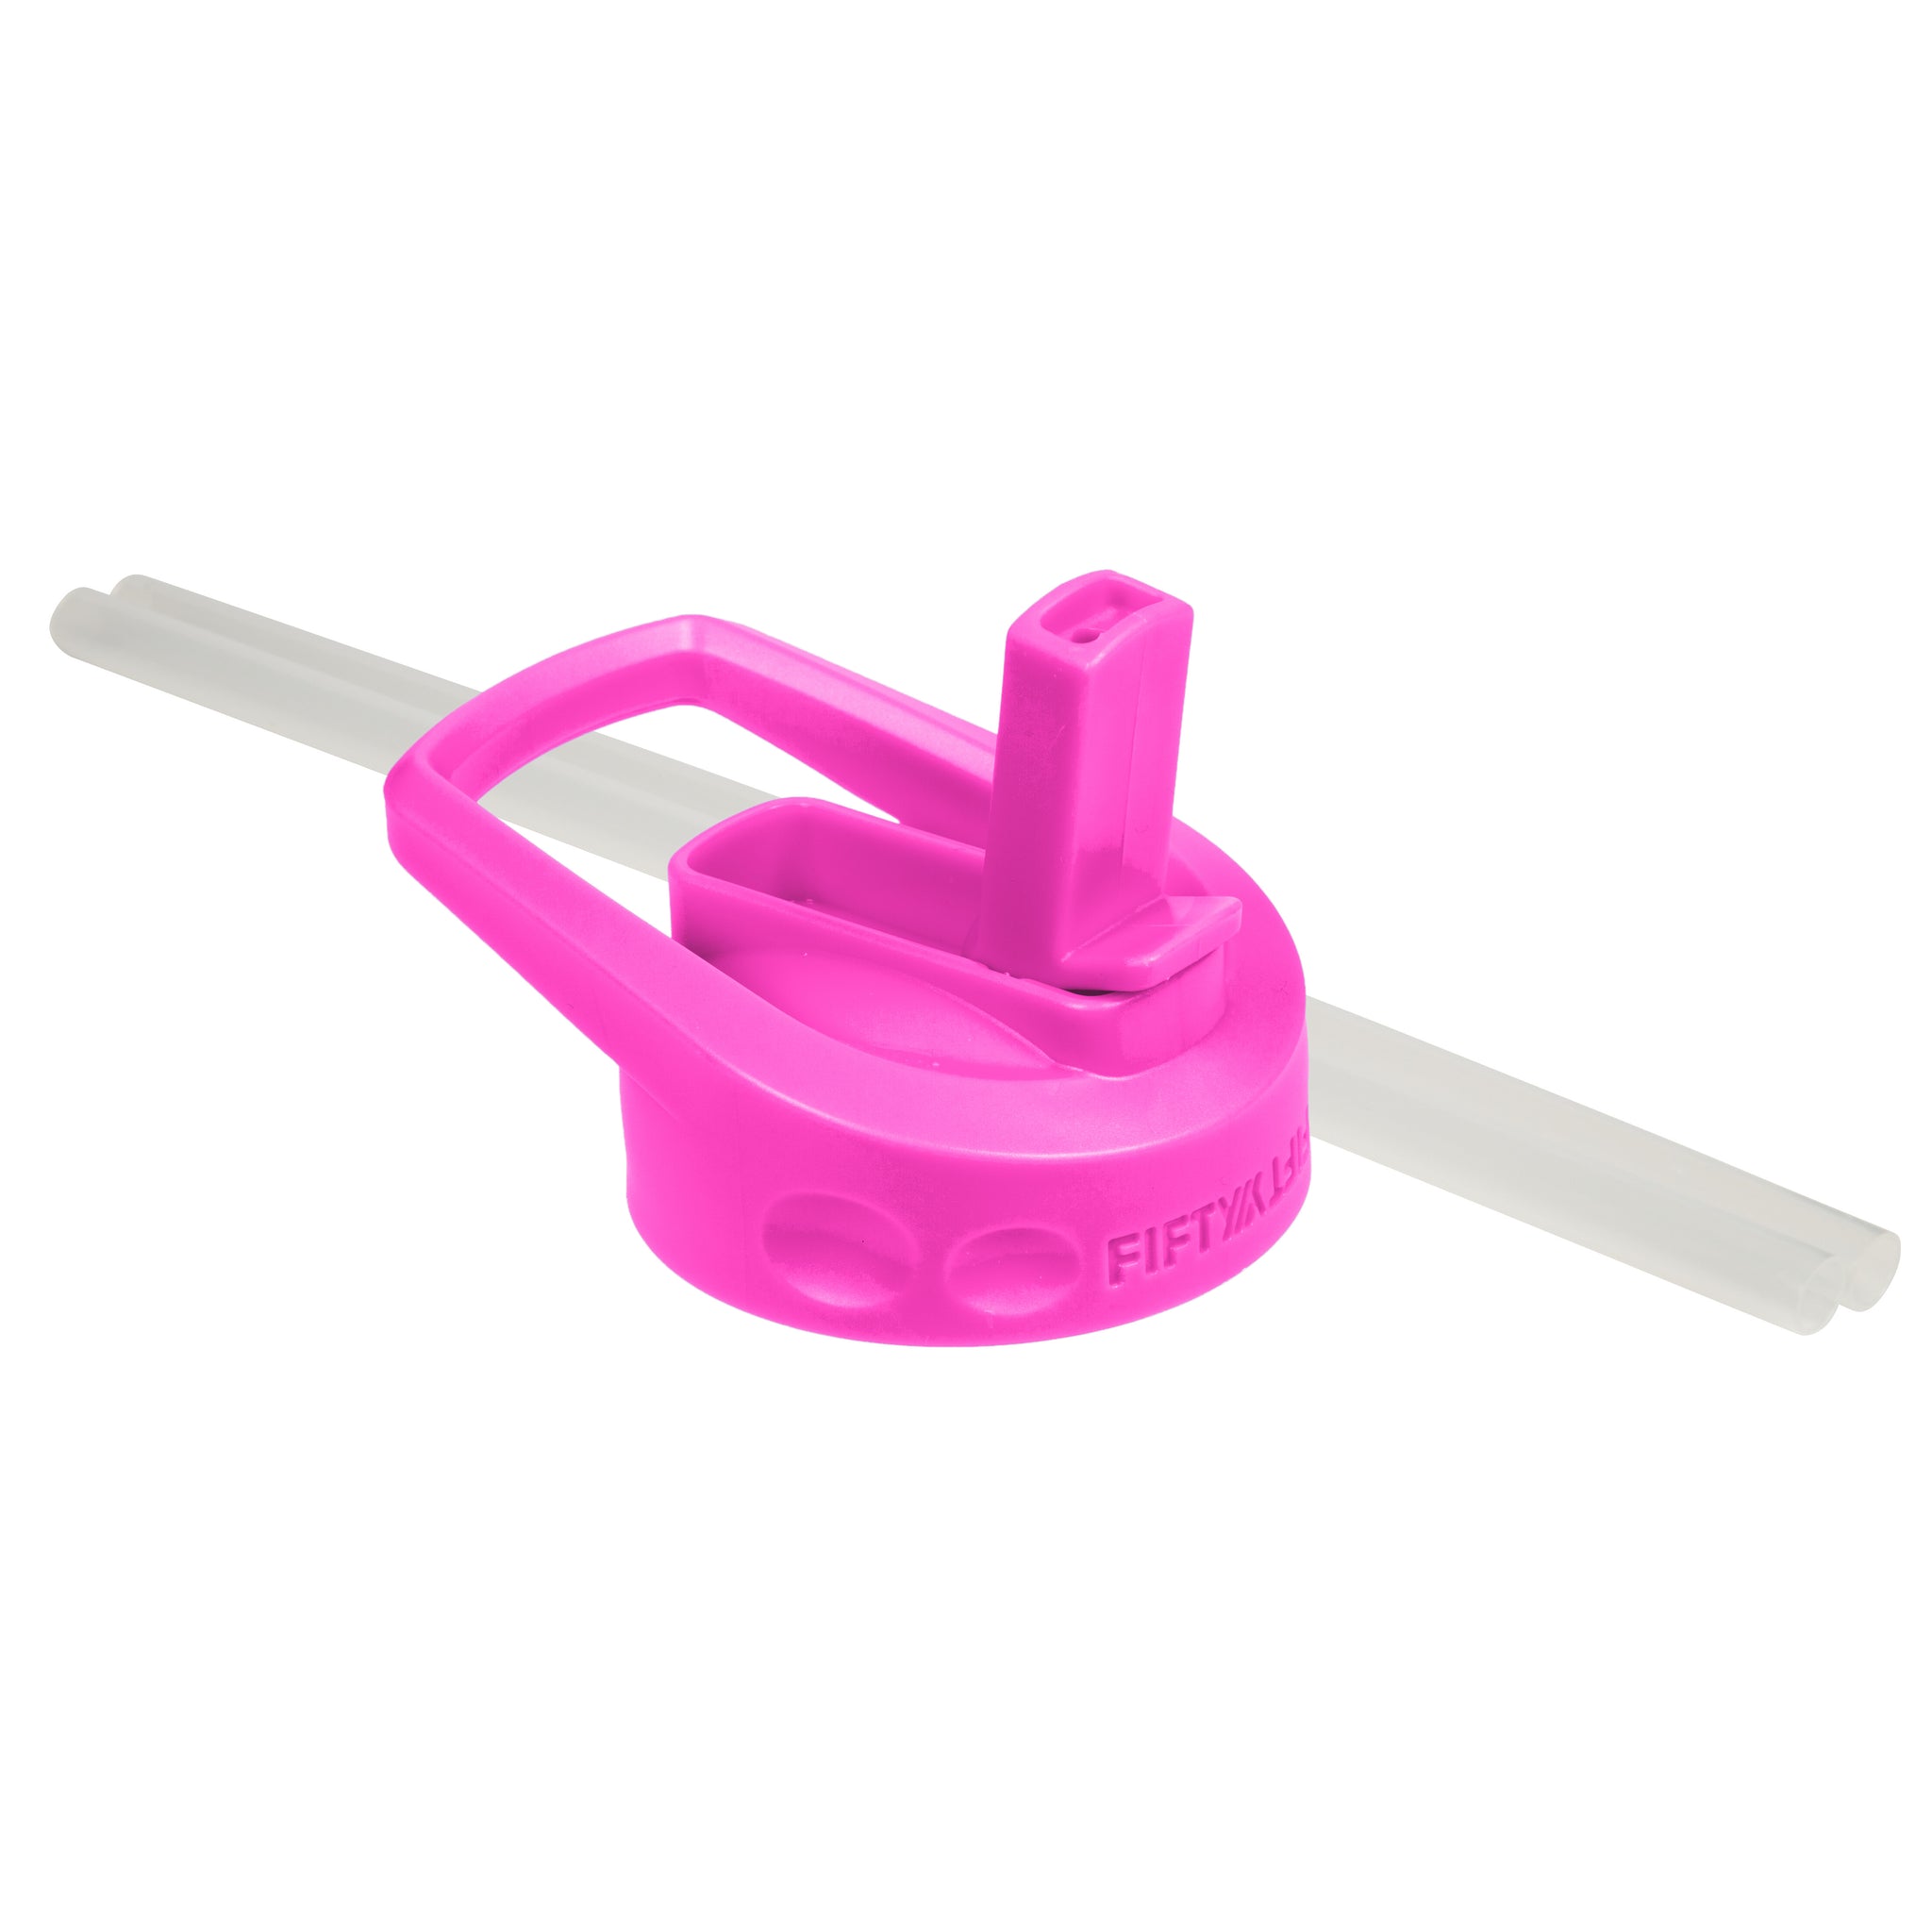 Anyone know where to get the new Insulated Flex Straw Lid? : r